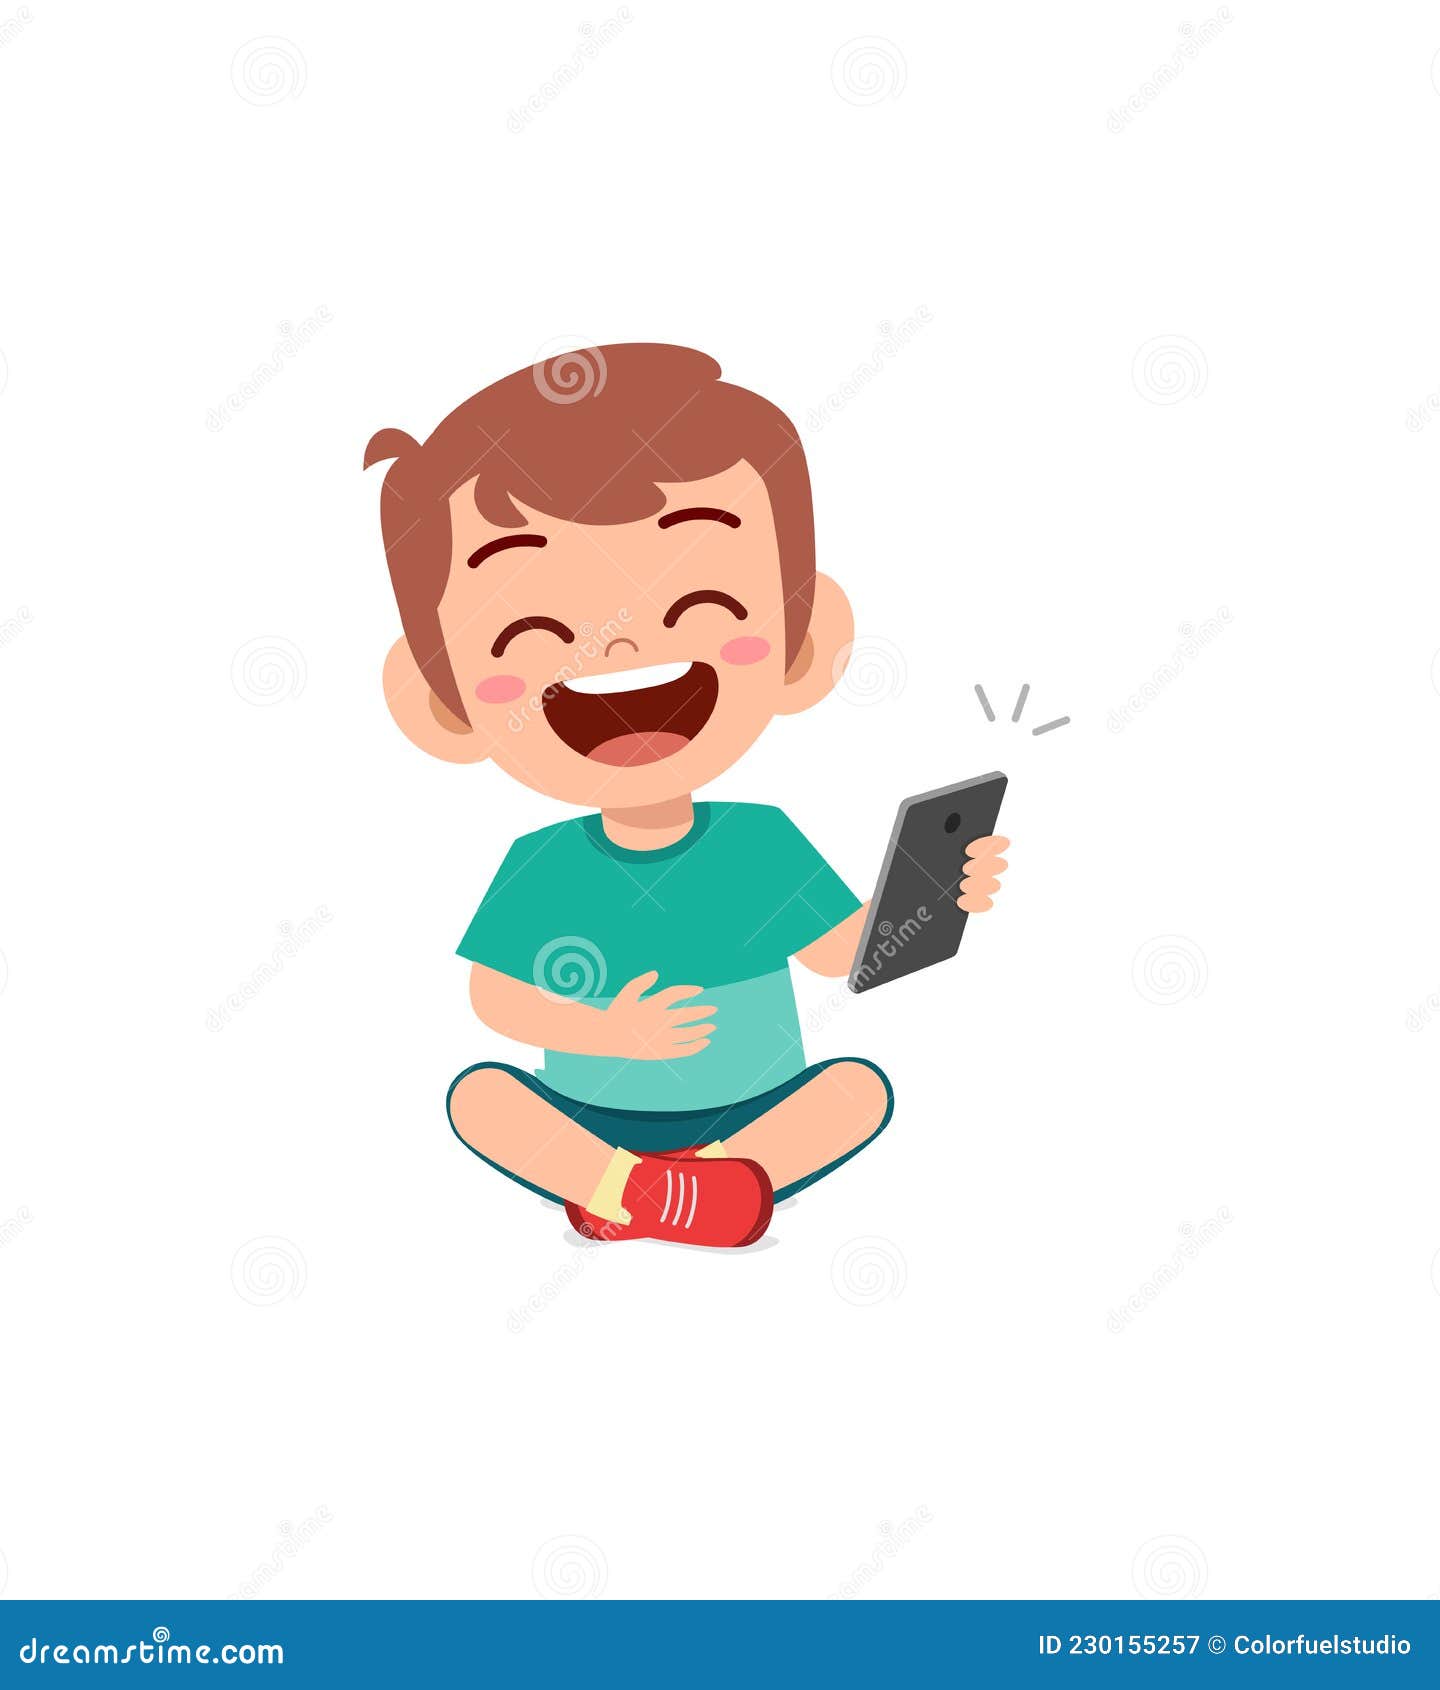 Little Boy Using Mobile Phone and Laugh Stock Vector - Illustration of ...